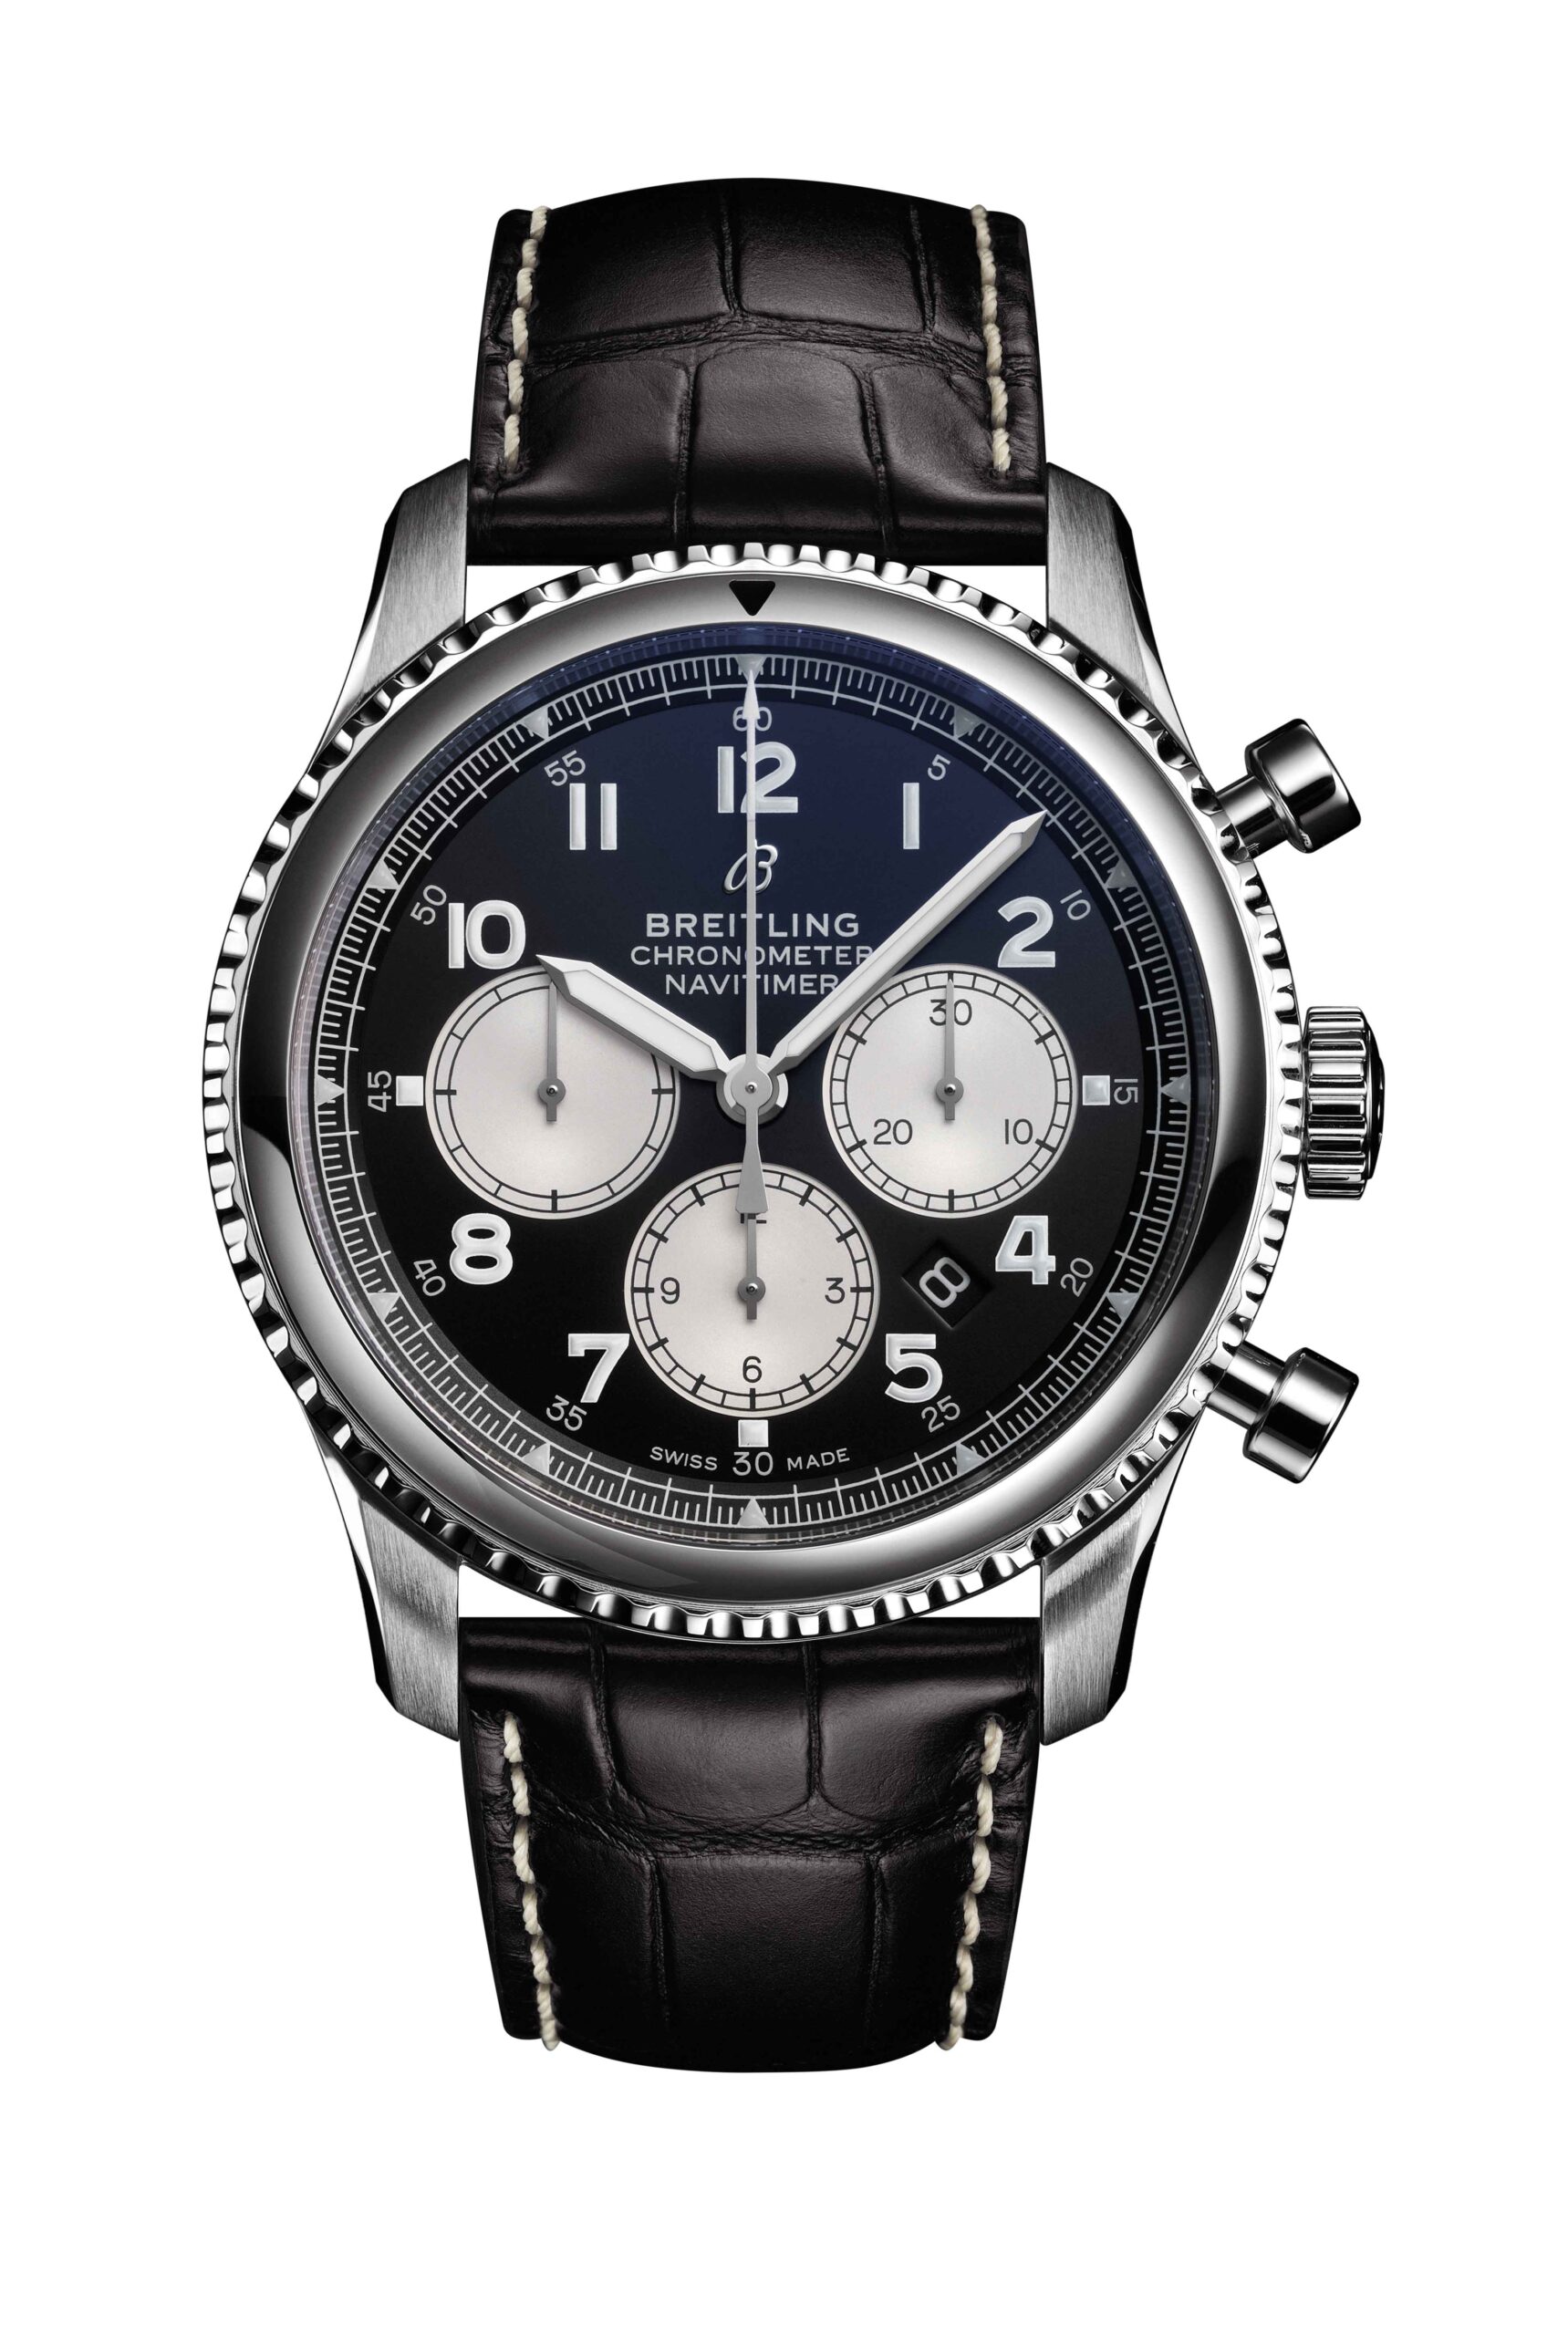 The new BREITLING Navitimer 8 Collection